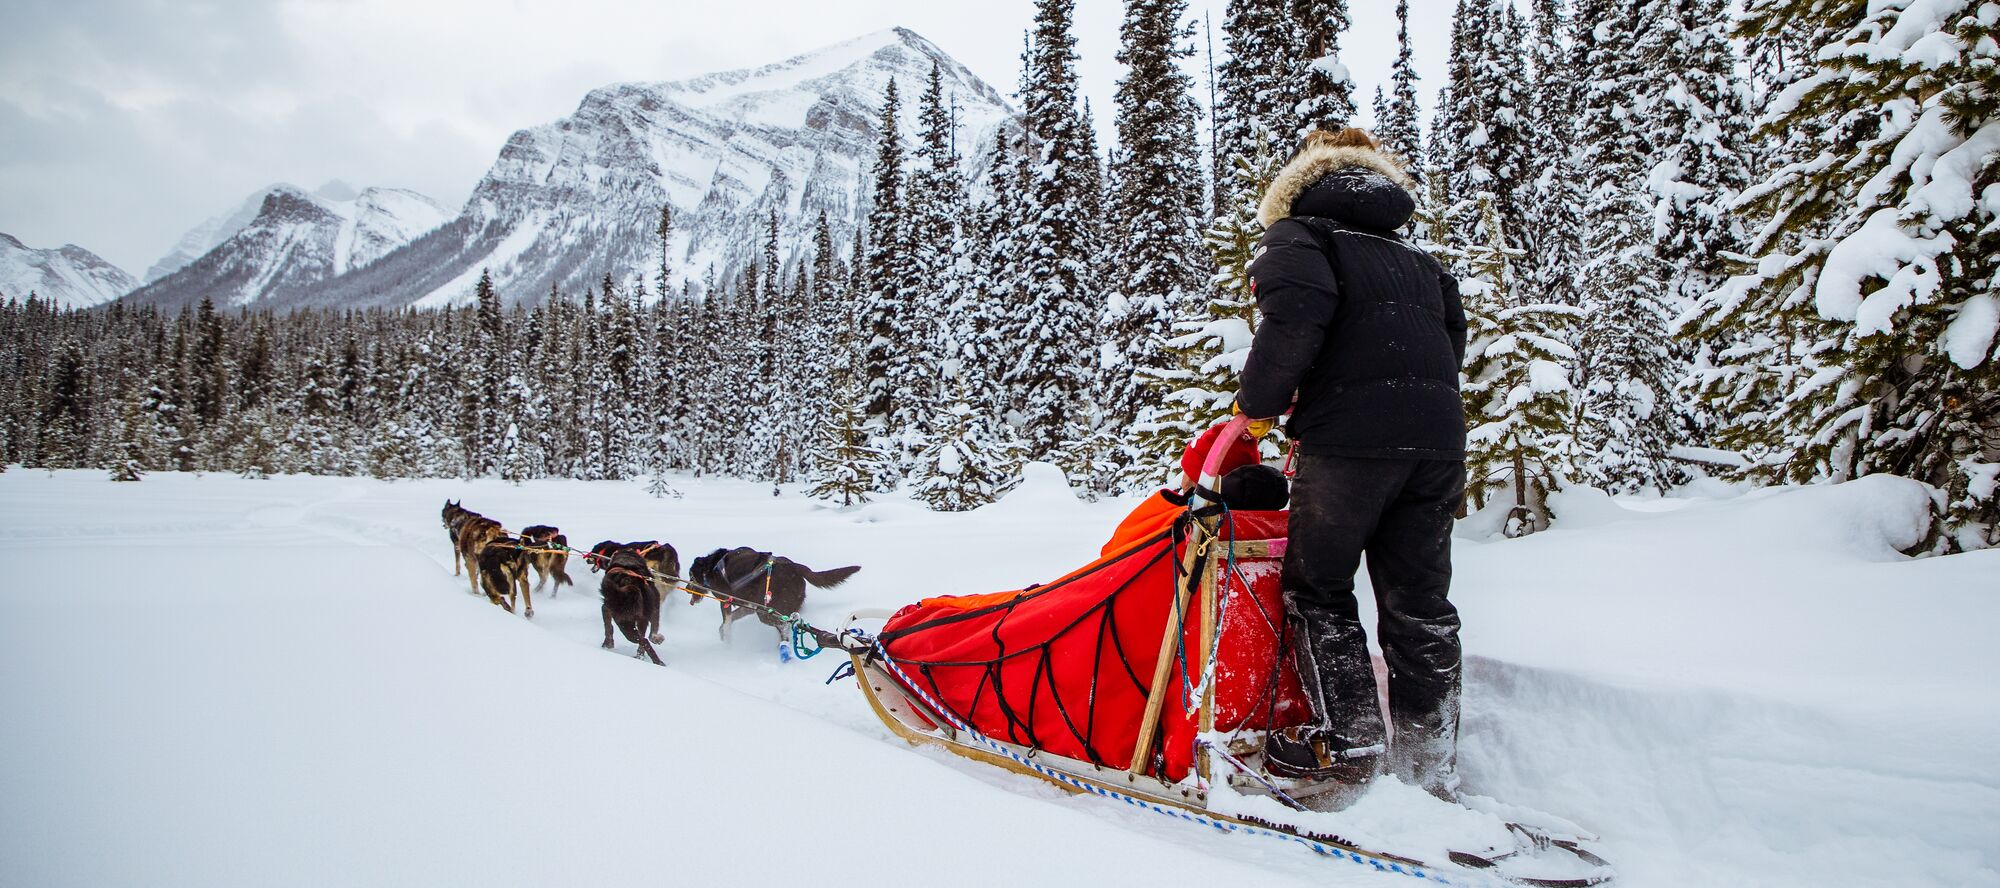 A dogsled tour travels through Lake Louise on a snowy day in Banff National Park